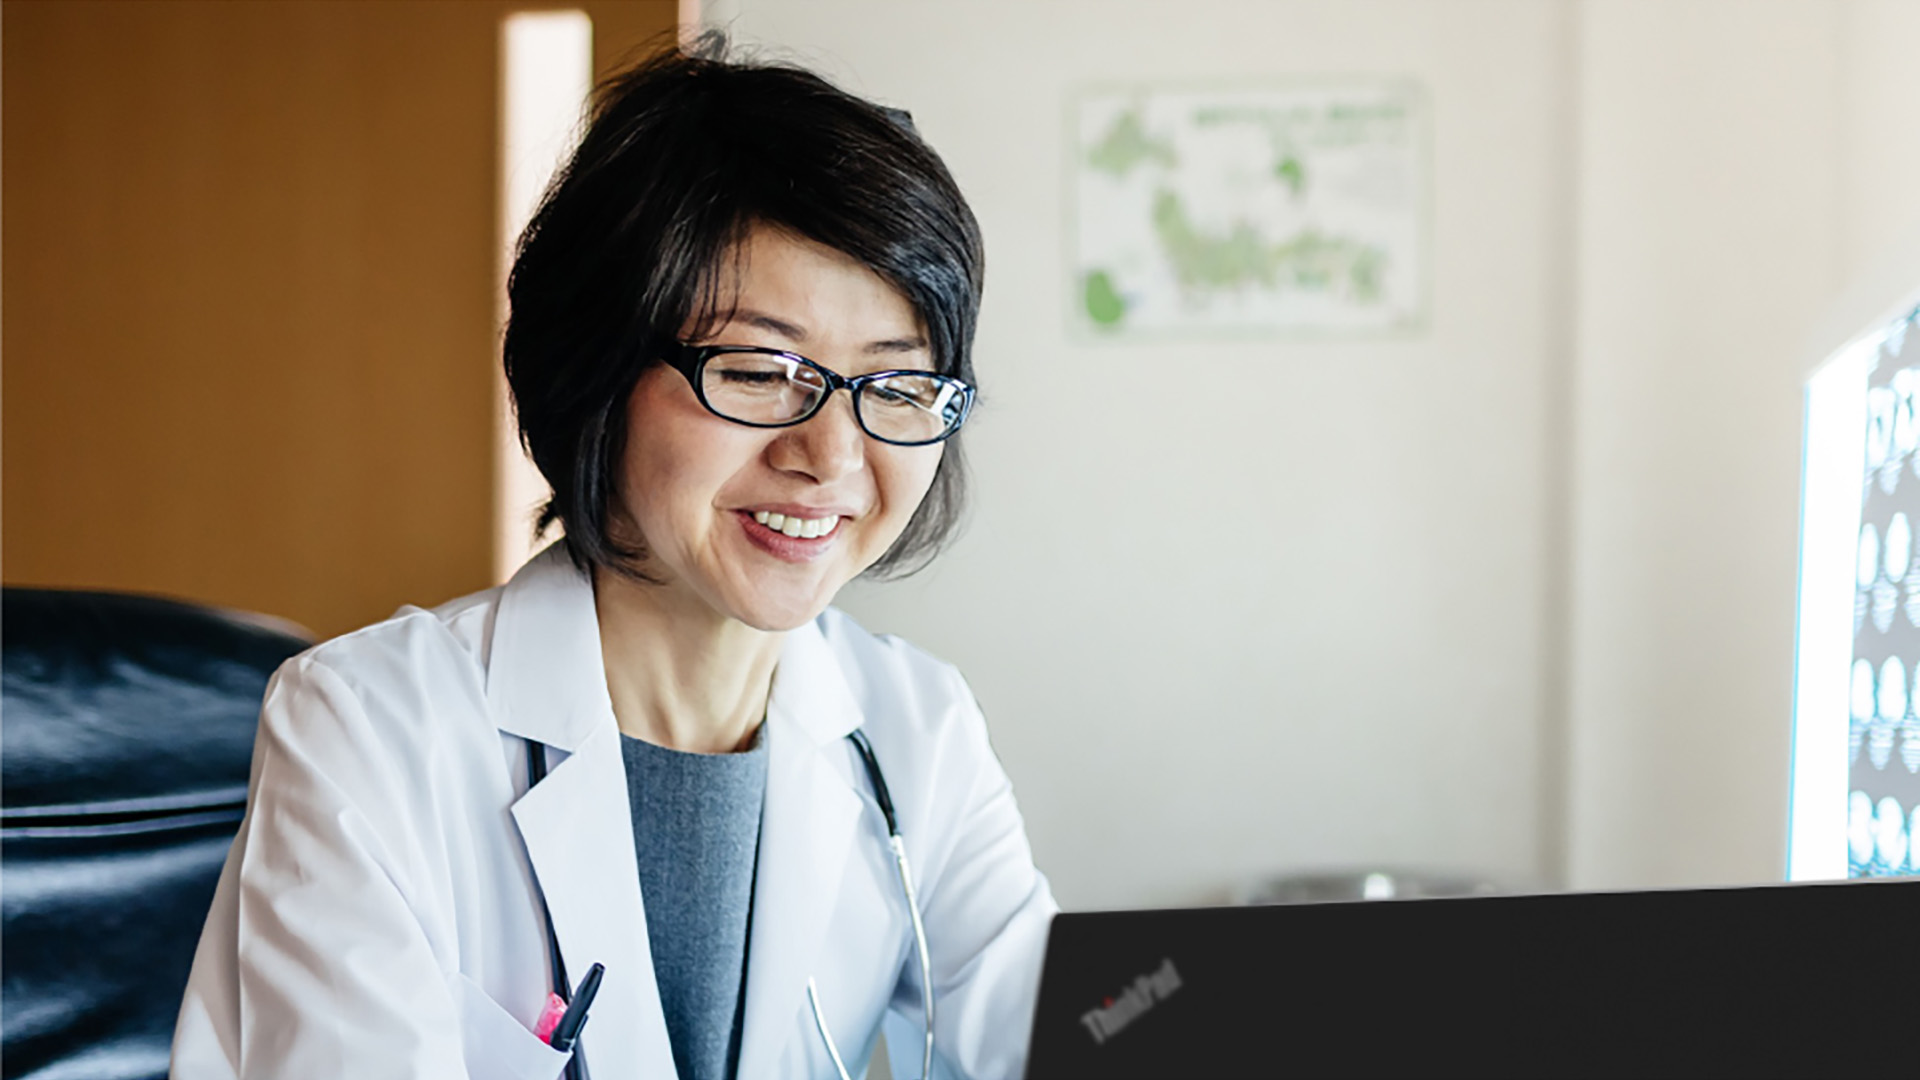 A doctor smiles while looking at her ThinkPad laptop